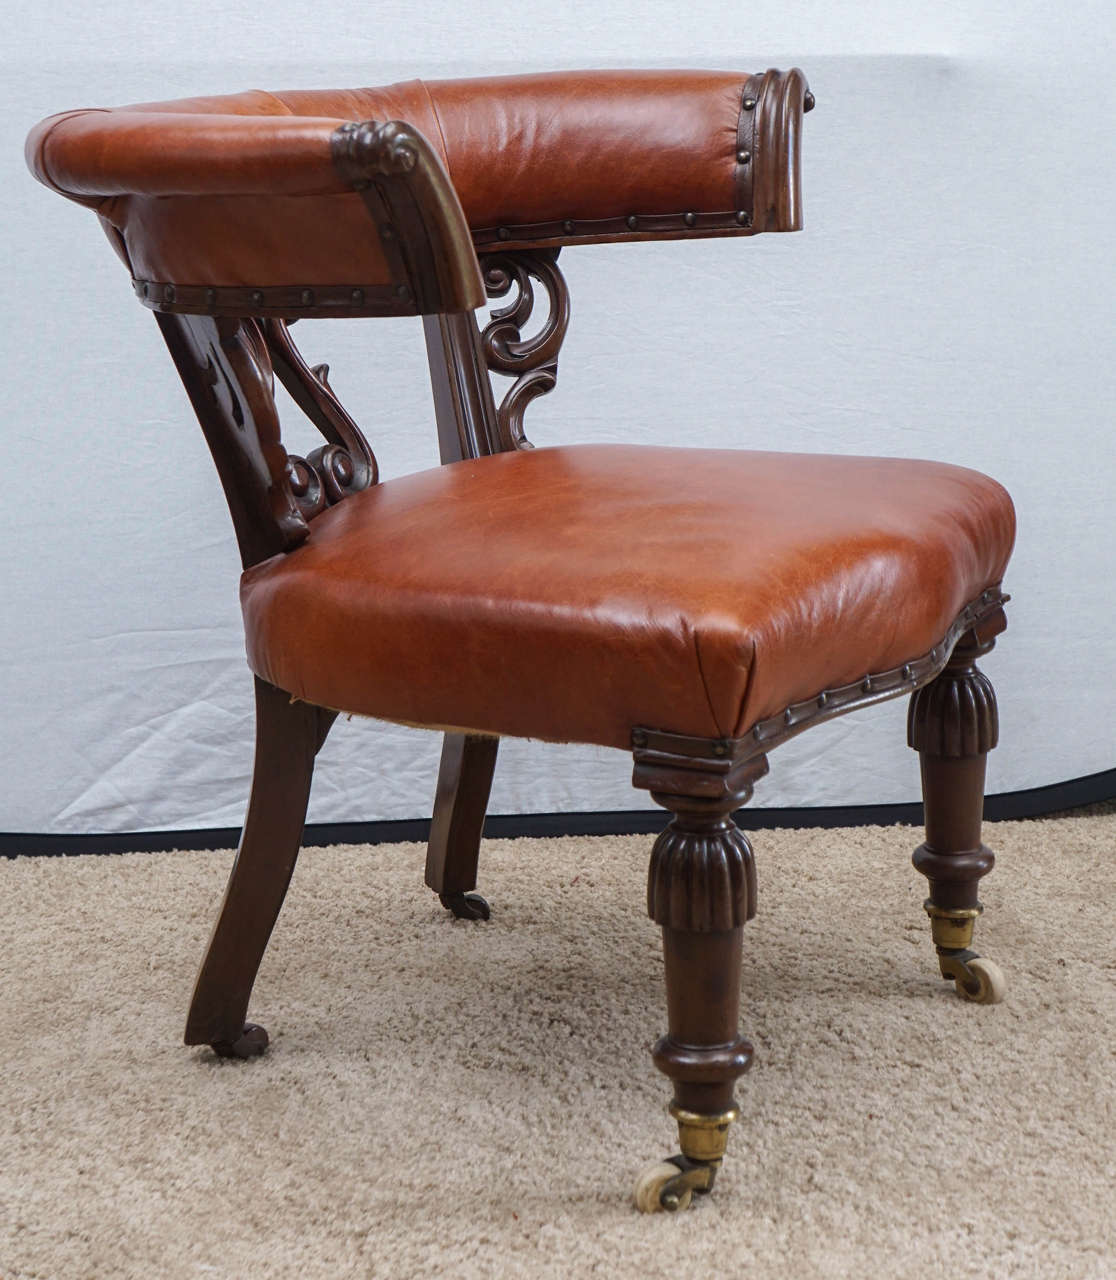 Early Victorian Mid-19th Century English Leather Chair on Casters For Sale